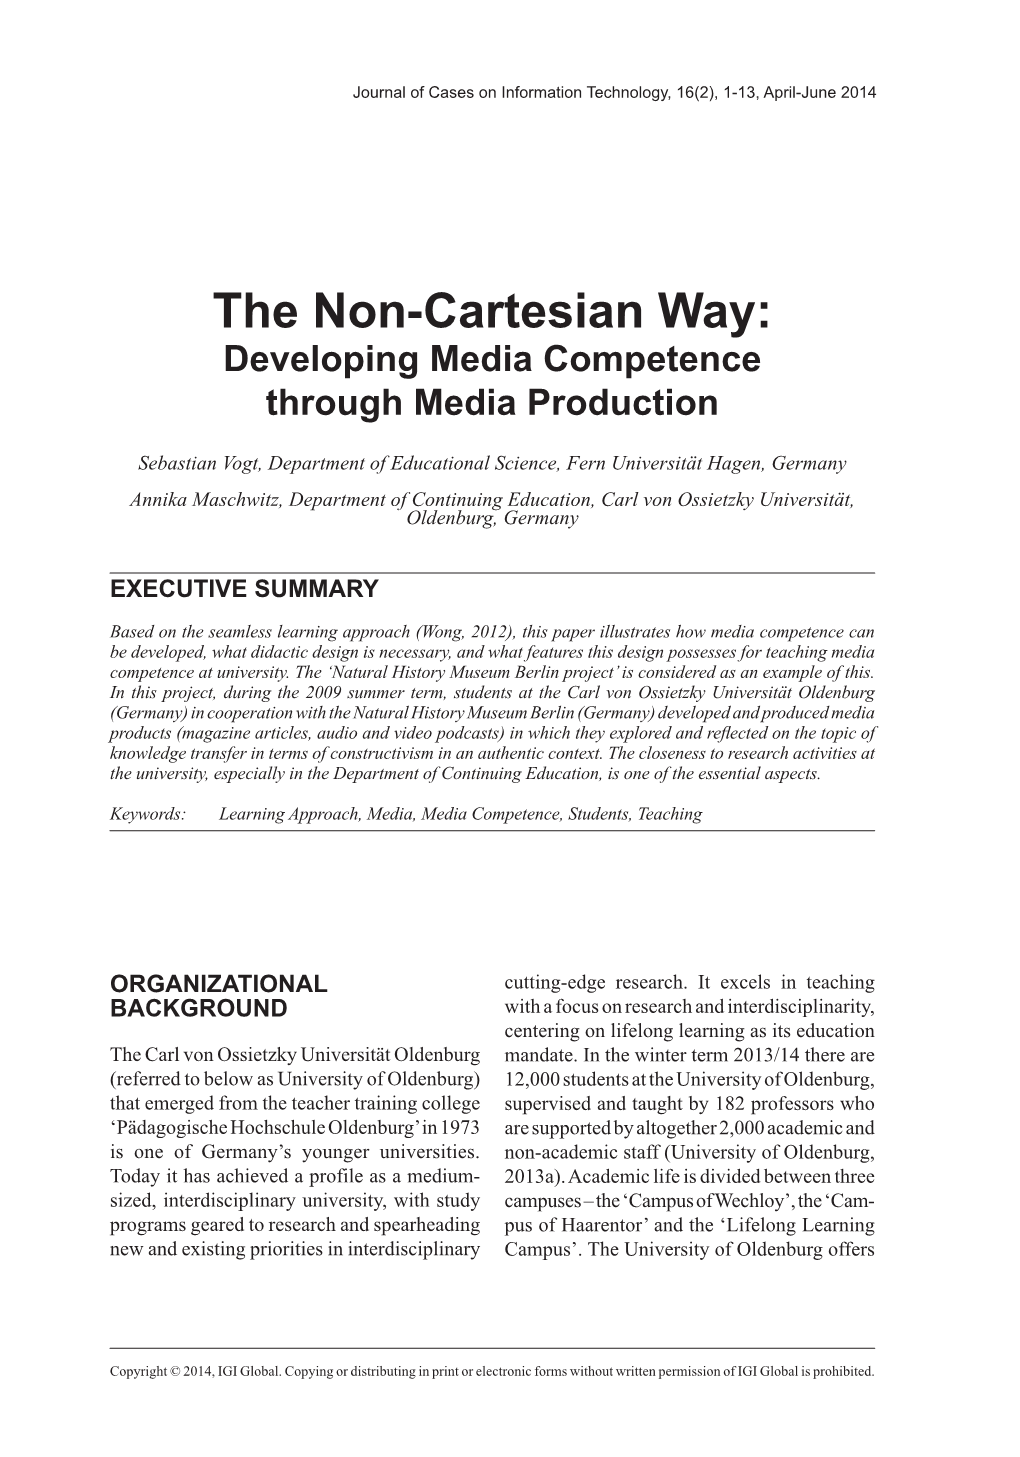 The Non-Cartesian Way: Developing Media Competence Through Media Production